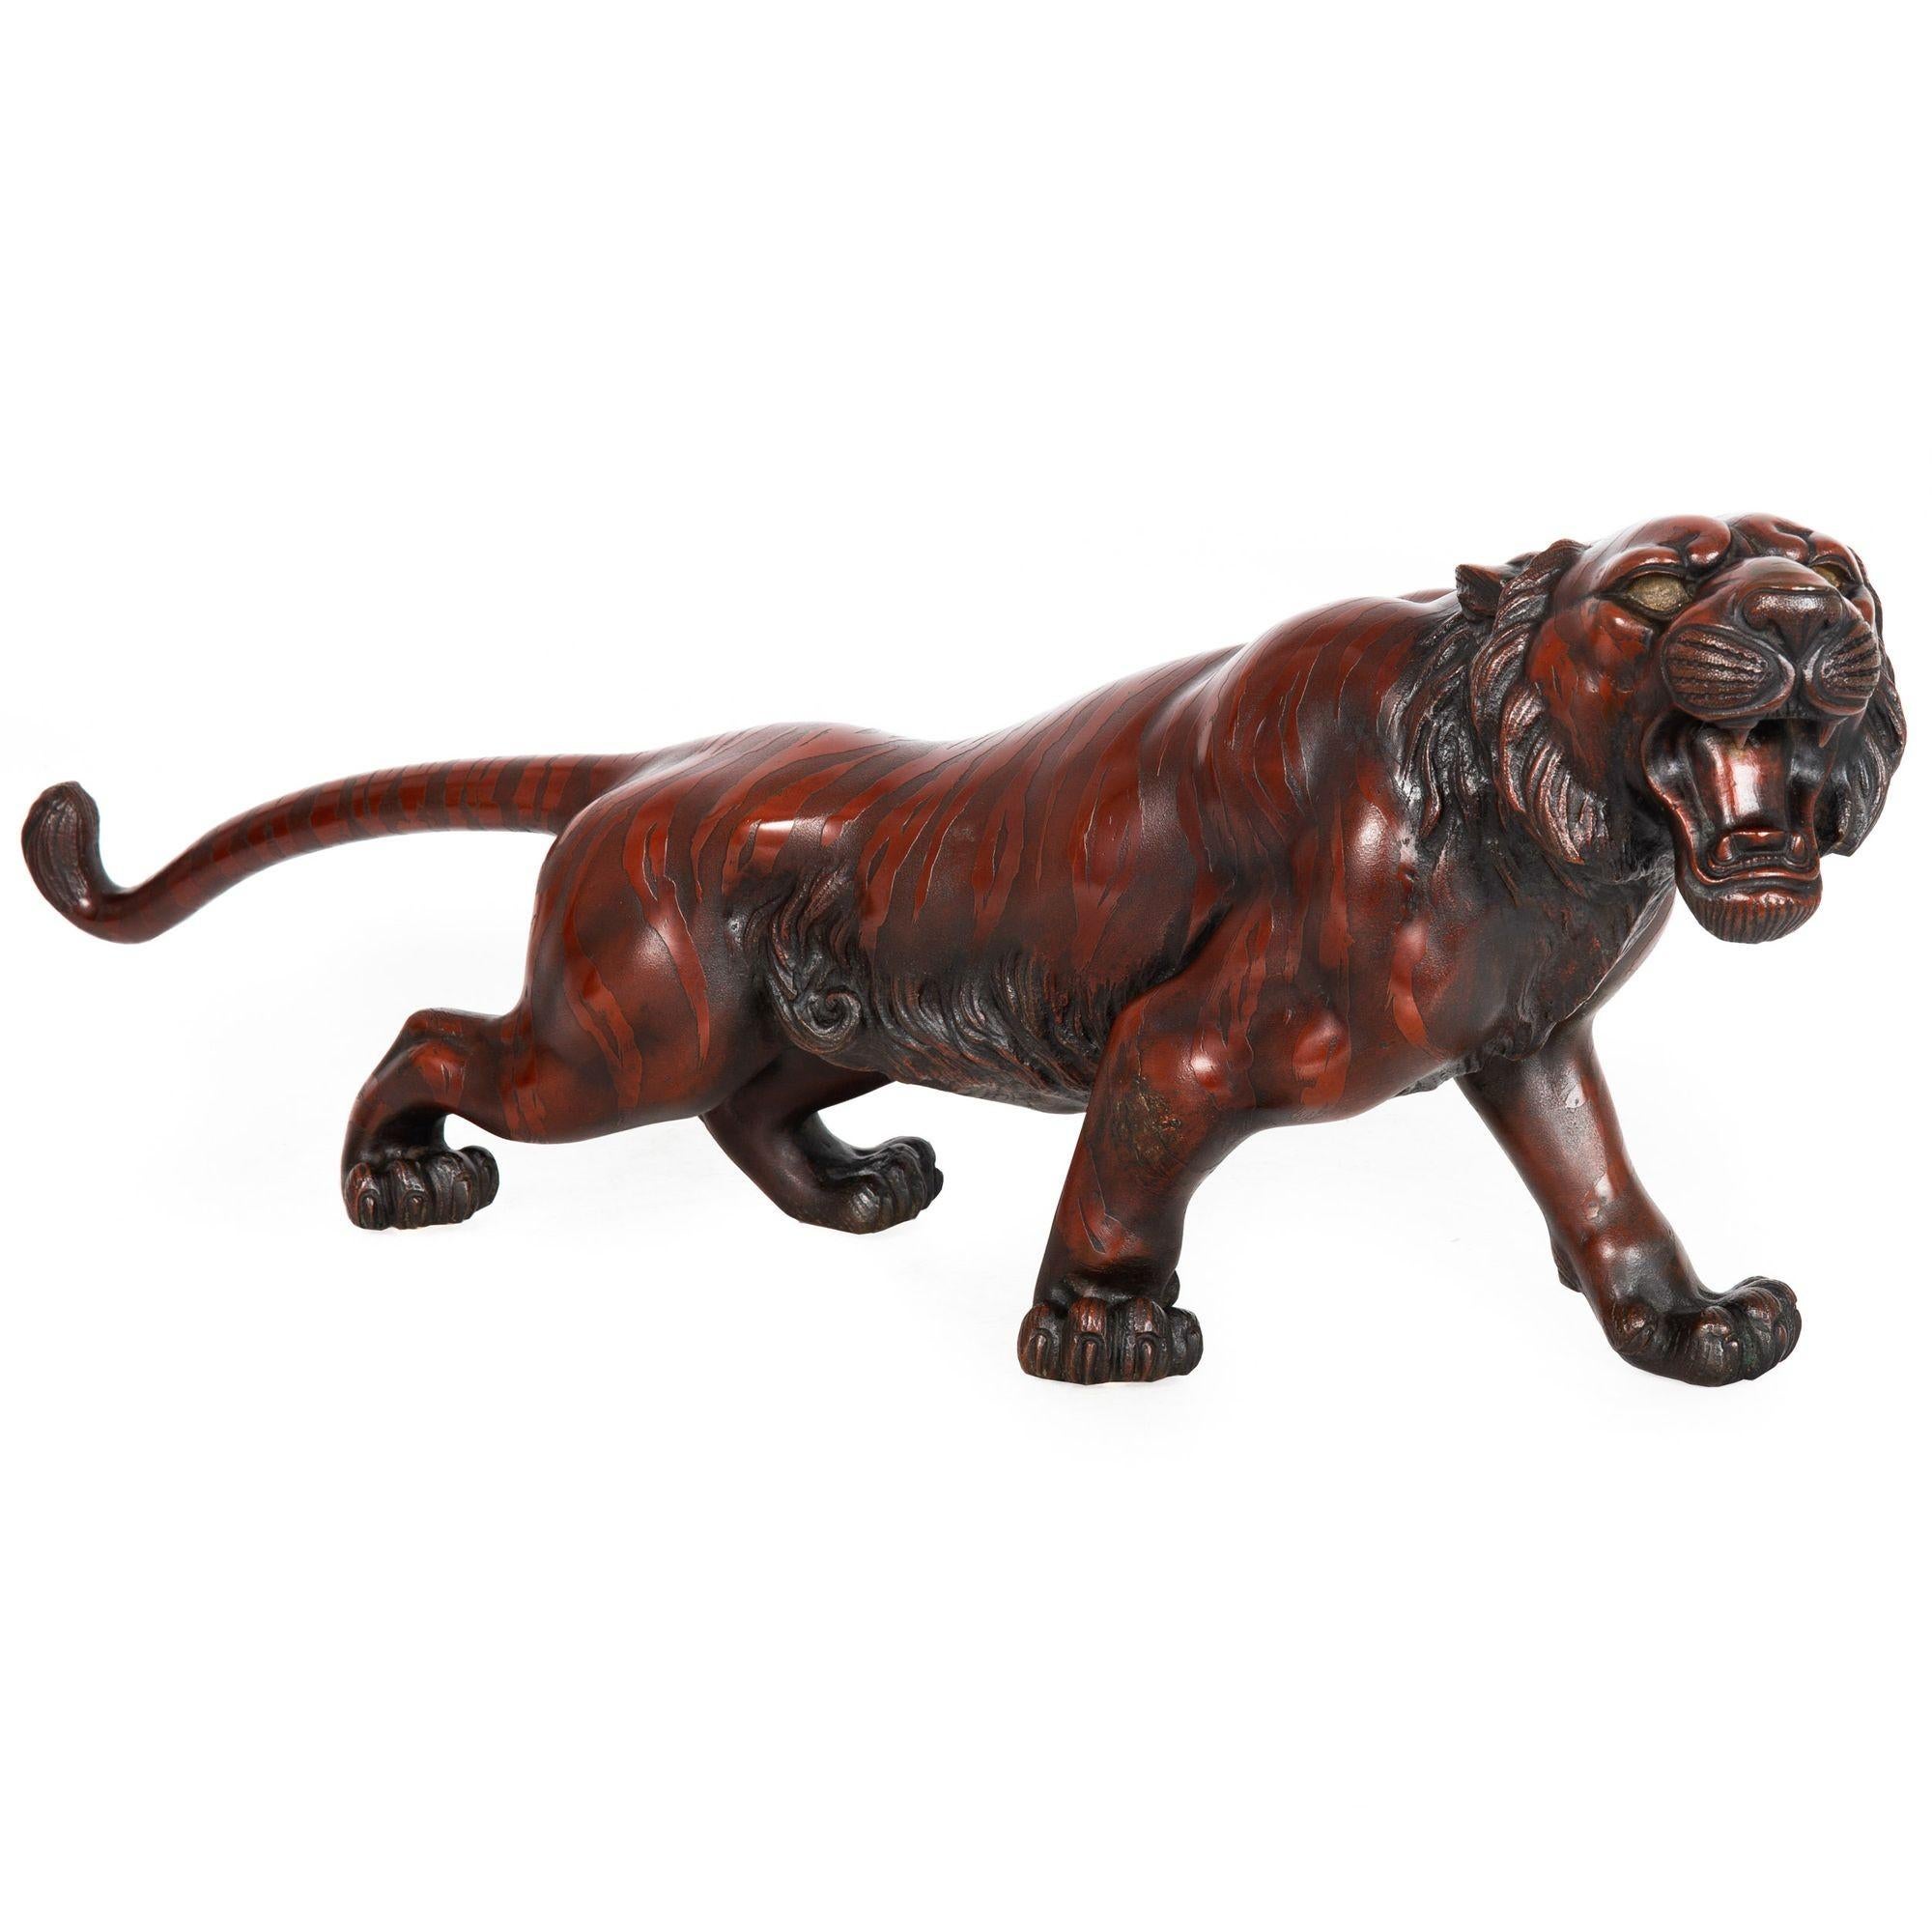 MEIJI PERIOD
Japan

A Roaring Tiger

Reddish-brown patinated bronze  signed to the underside  probably cast circa the first quarter of the 20th century

Item # 311ZDK29A

A brilliant example of a Roaring Tiger, this fine Meiji Period okimono is